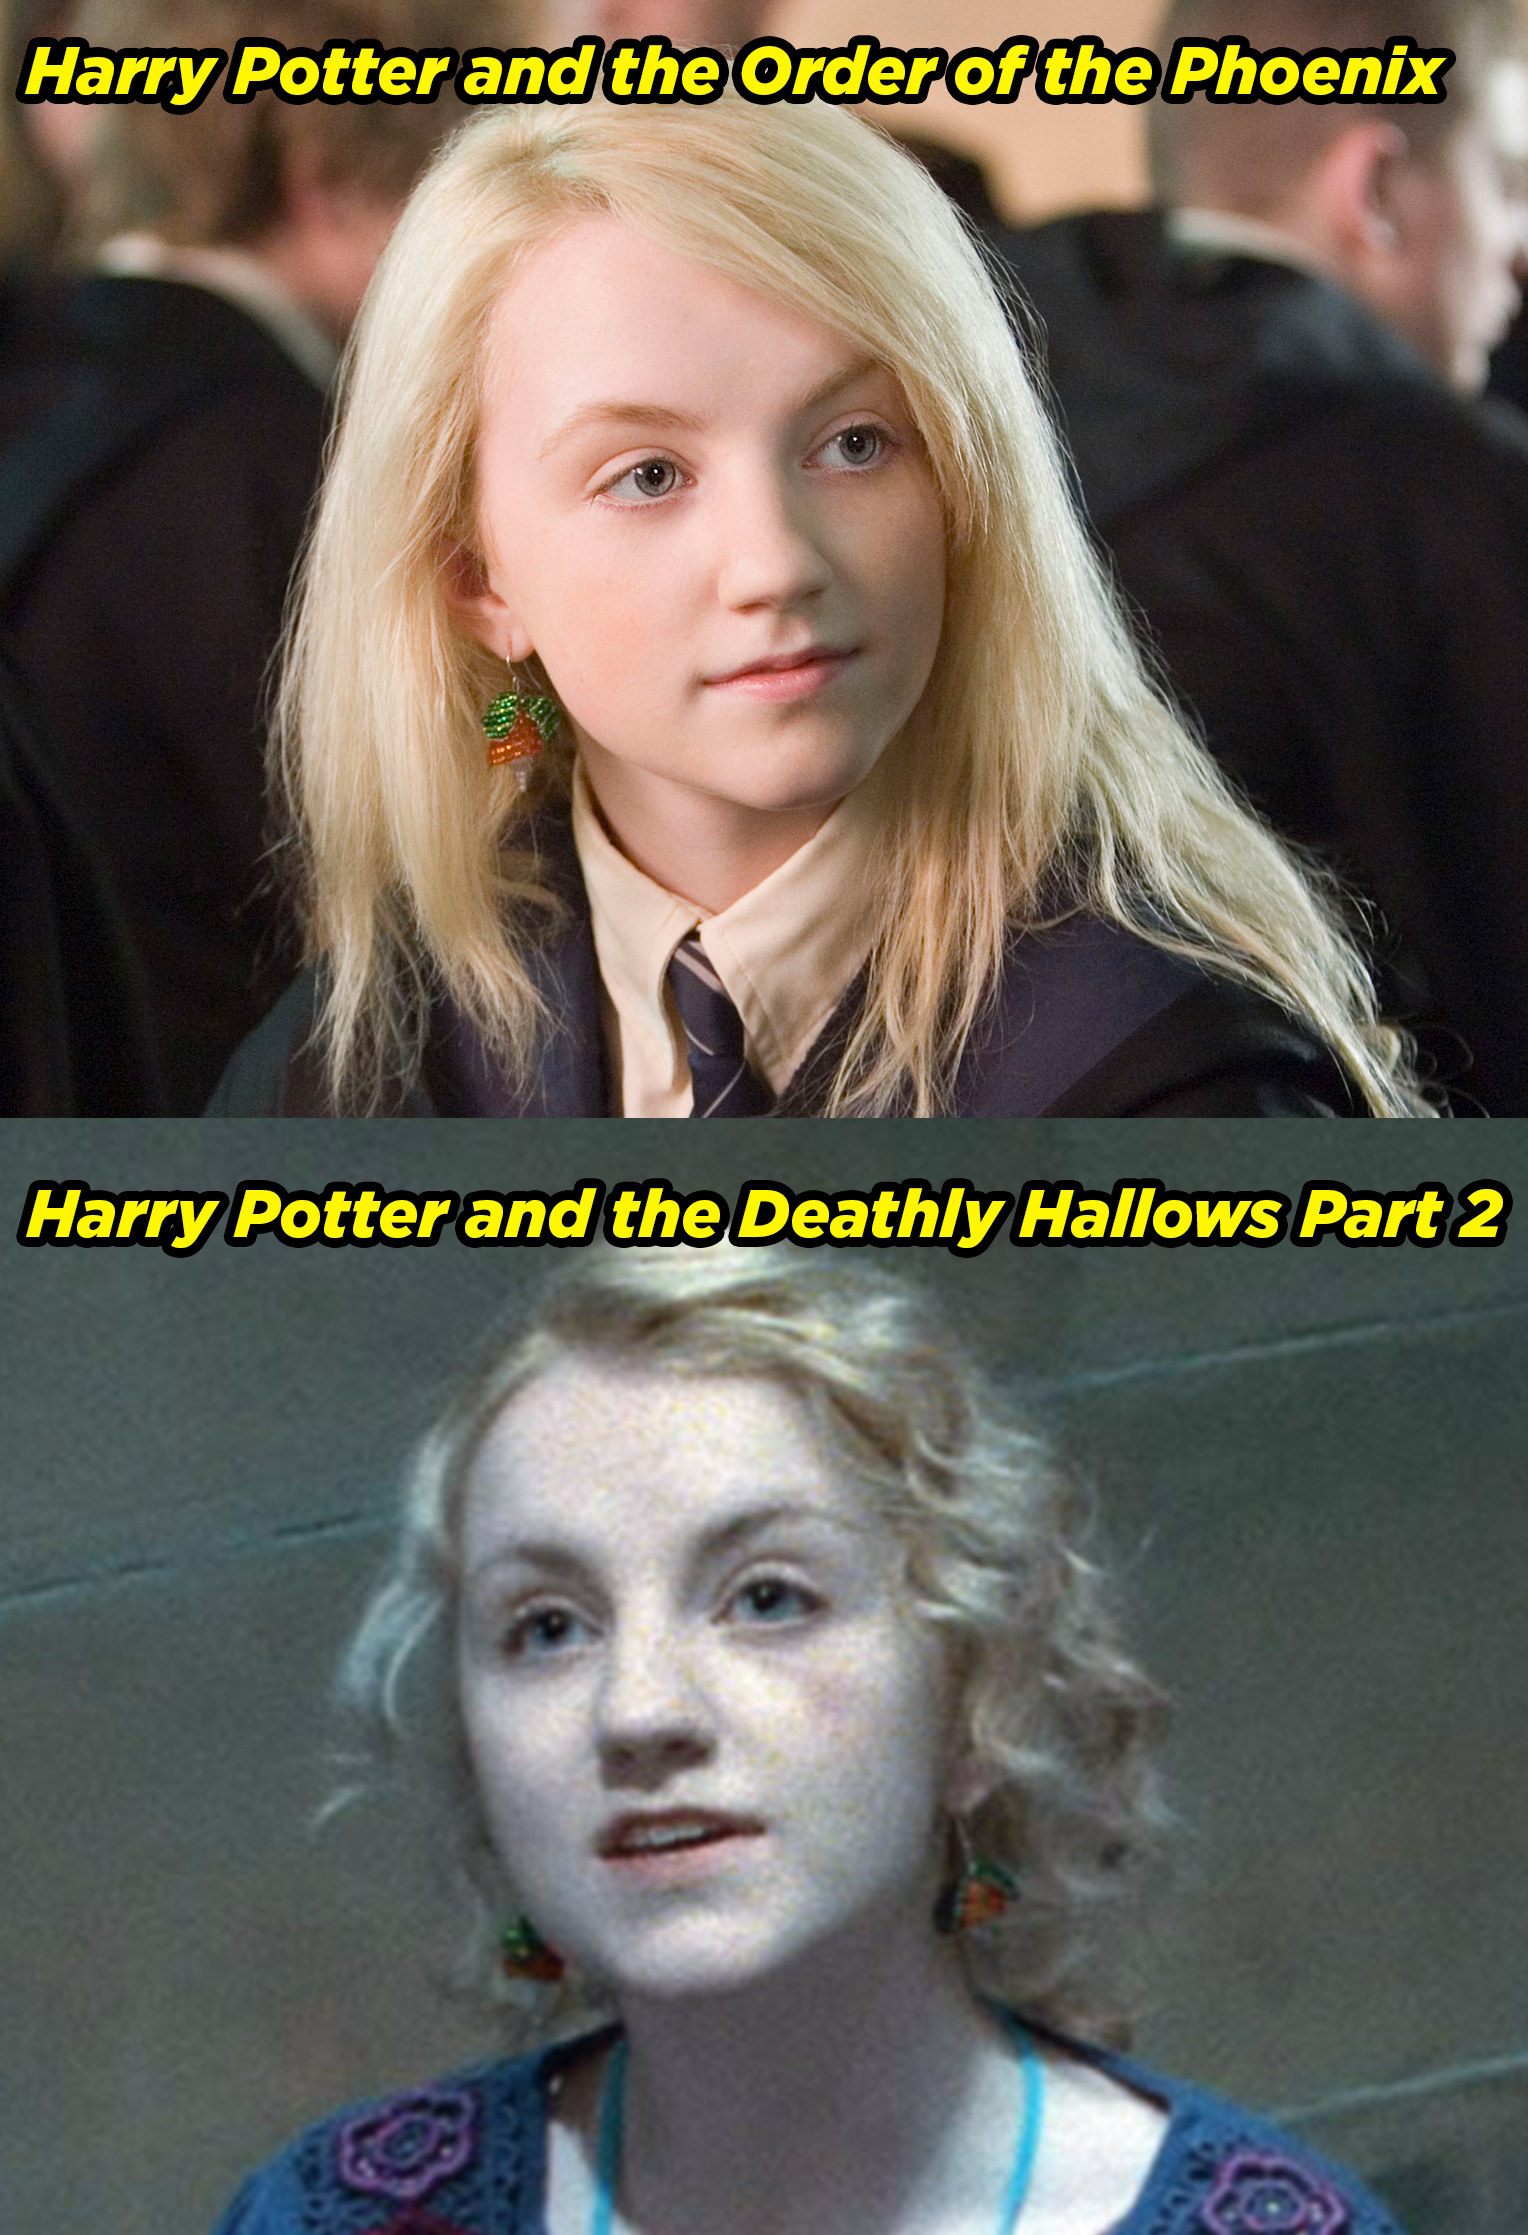 Evanna Lynch in the Order of the Phoenix and Deathly Hallows Part 2